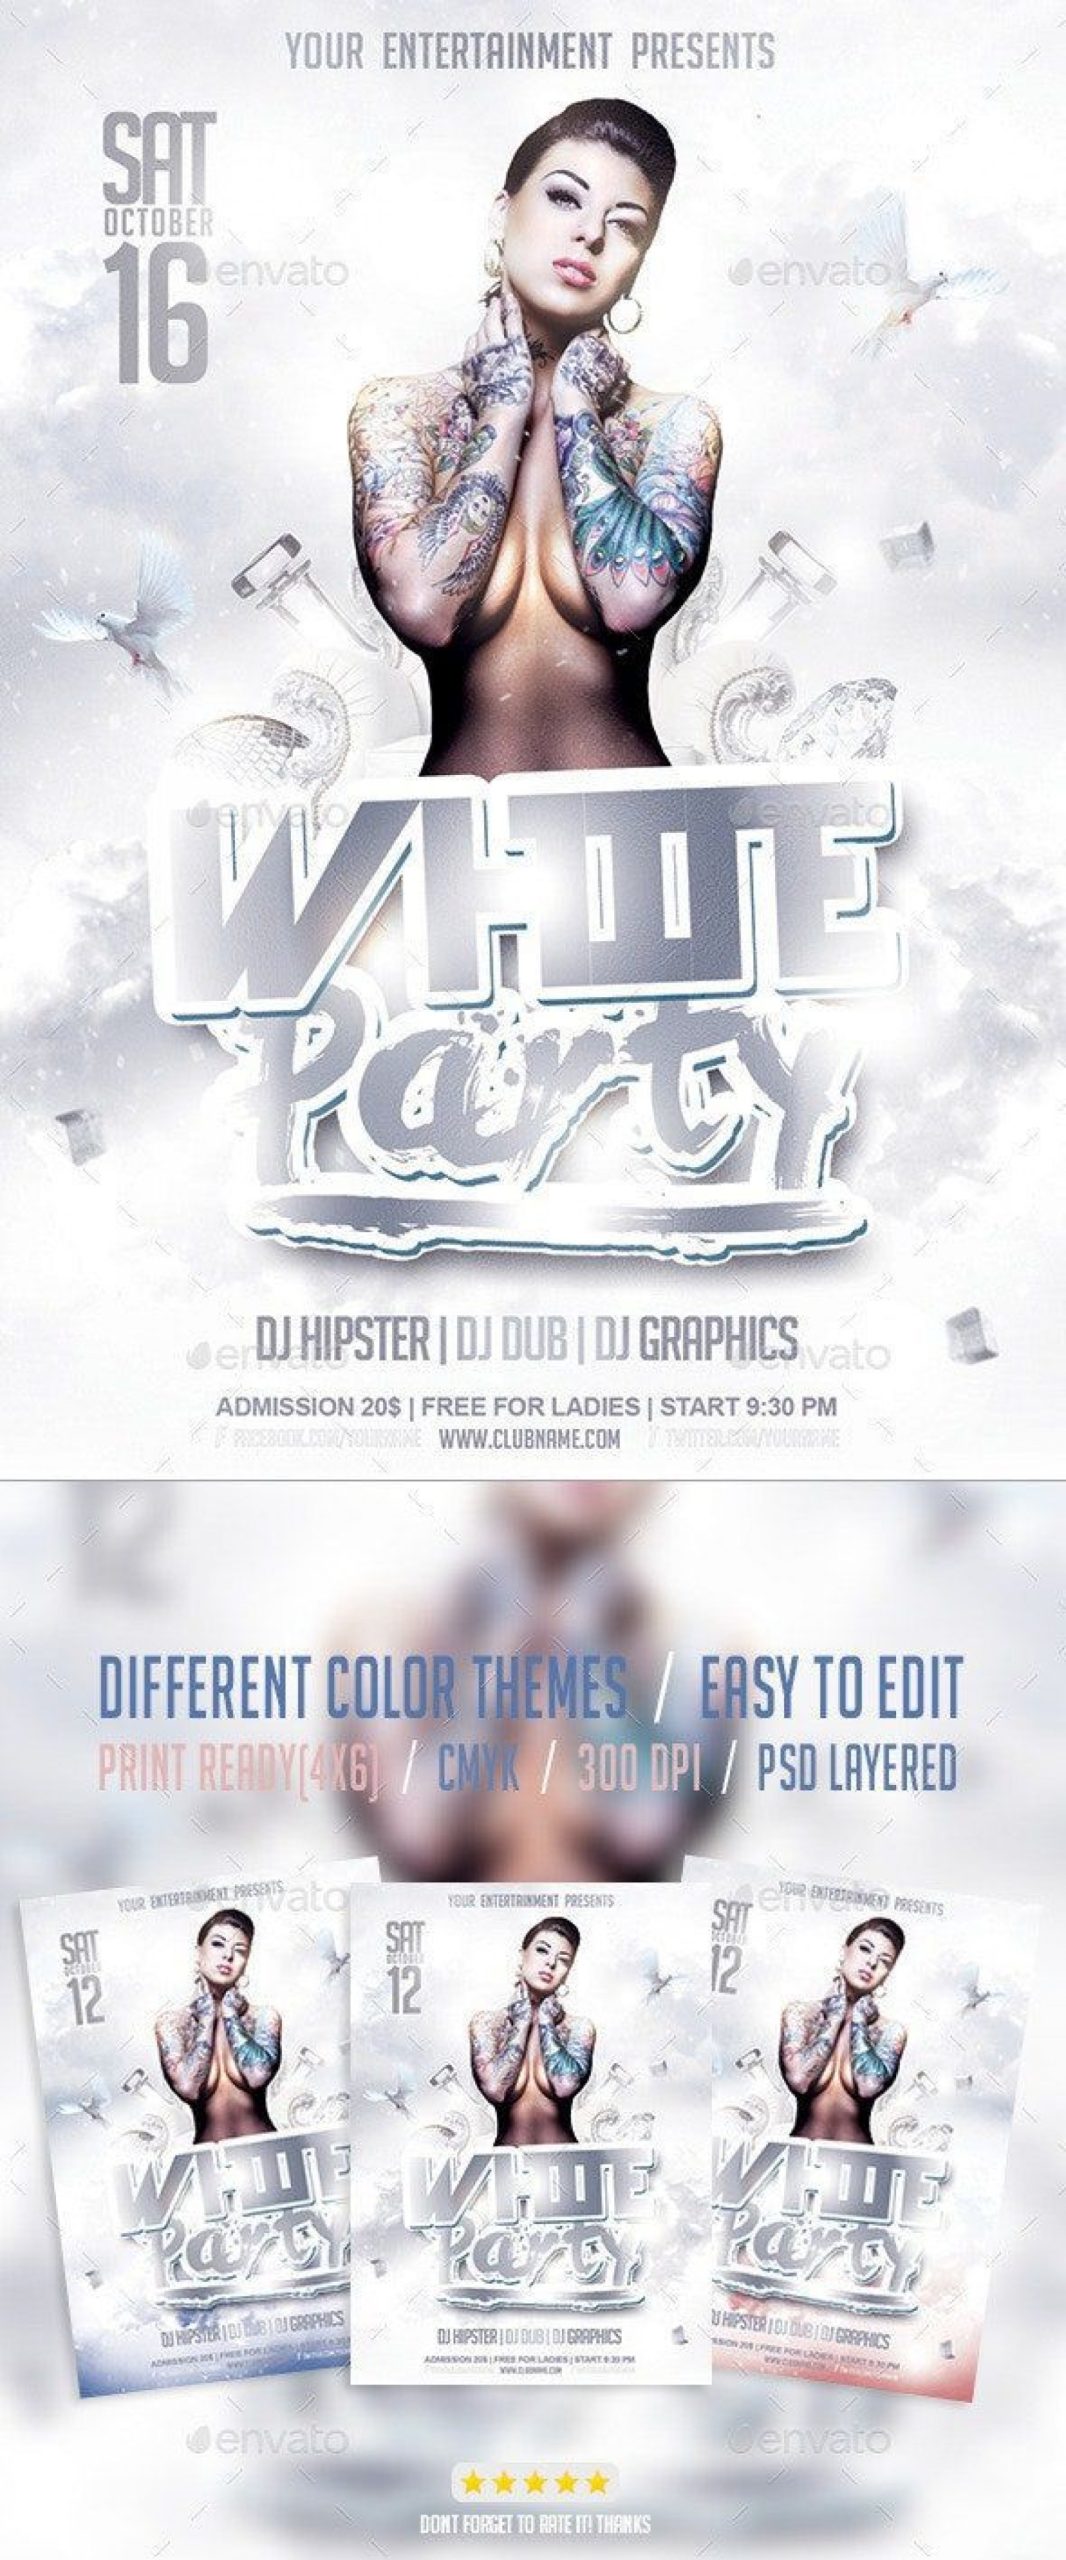 All White Party Flyer Template Free Psd ~ Addictionary Intended For Free All White Party Flyer Template